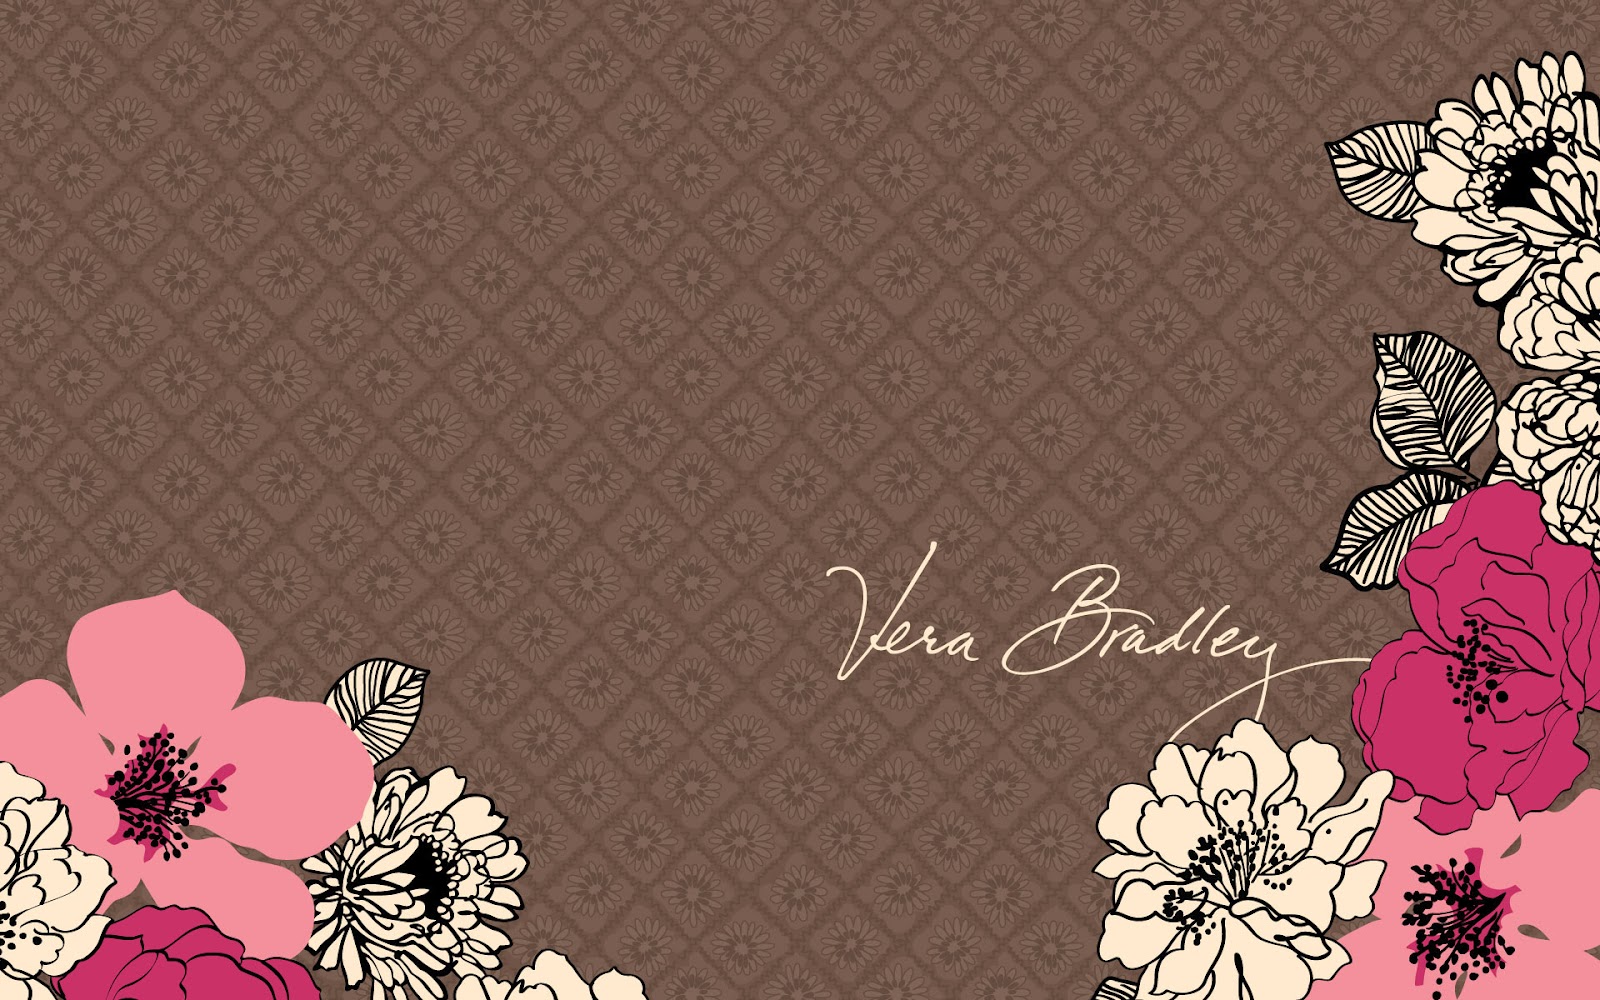 Here Are Some Vera Bradley Wp S That I Found On The Web They